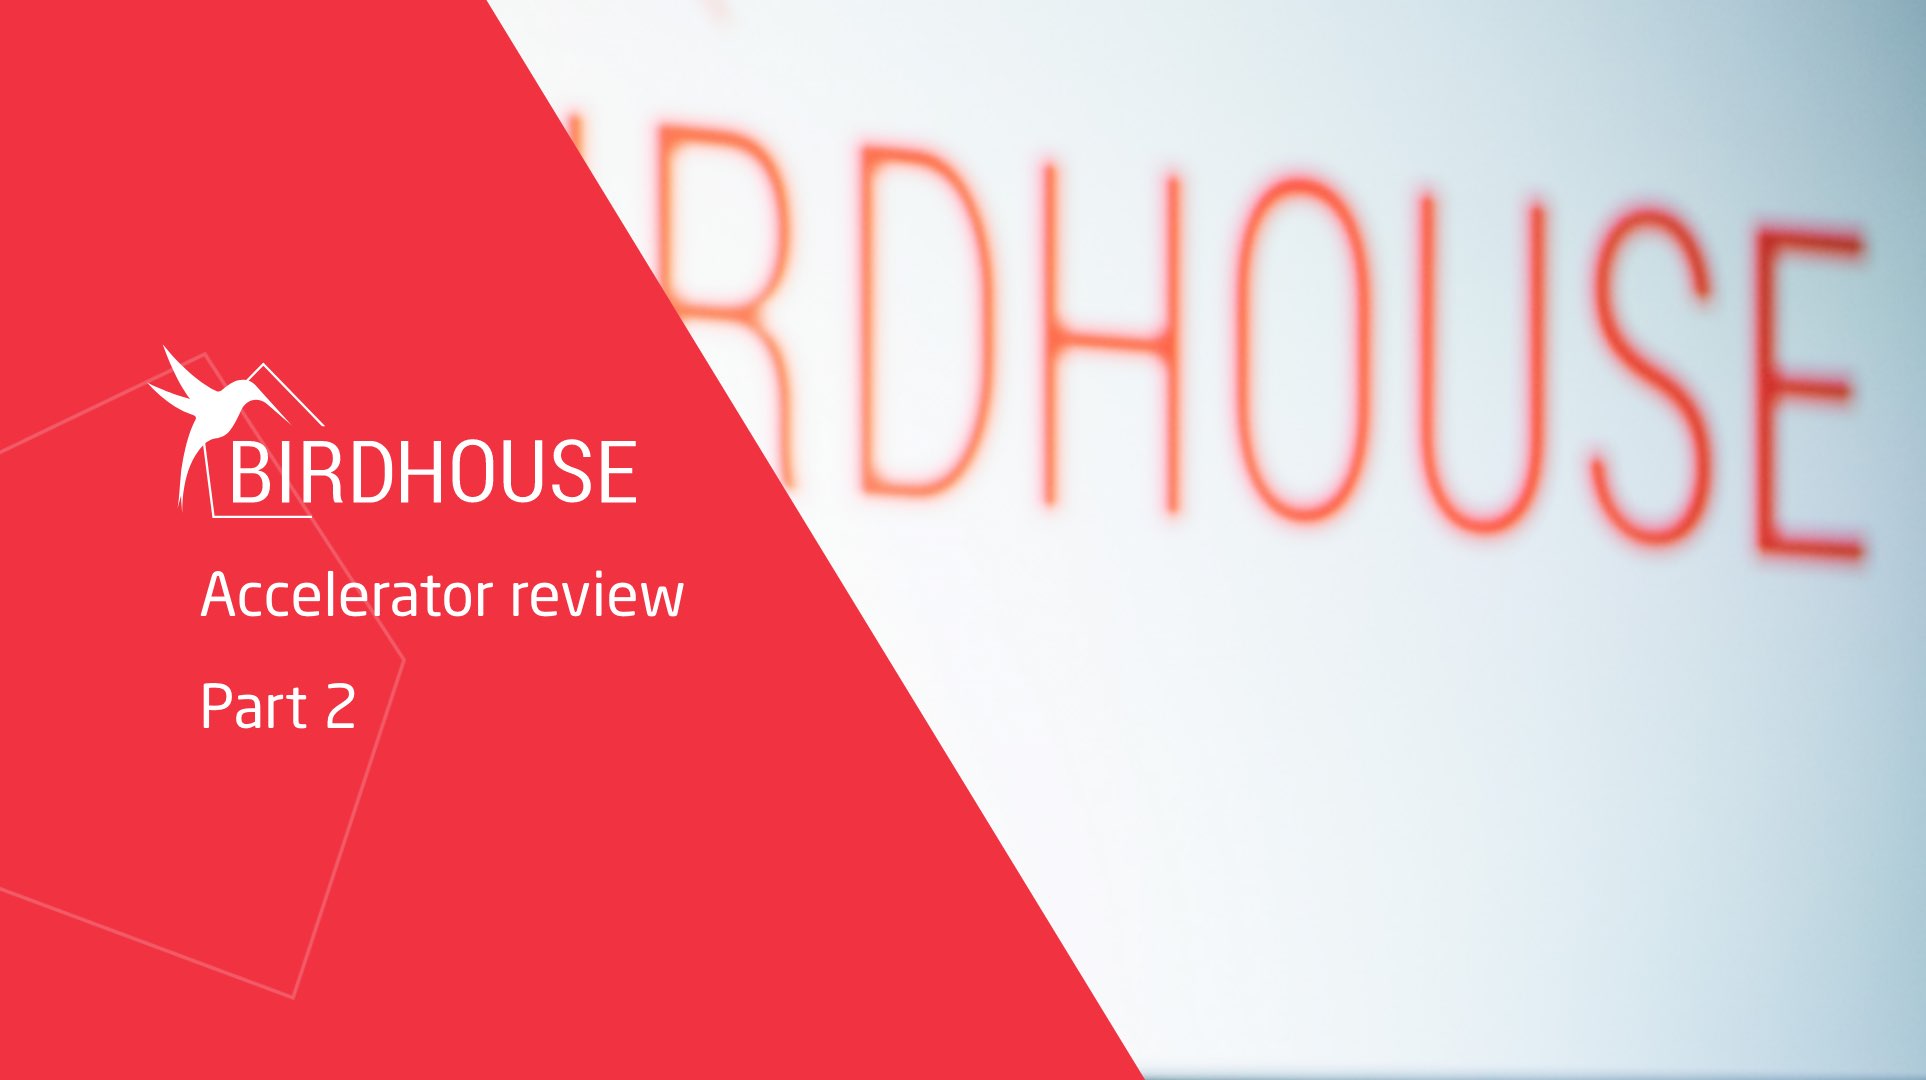 Birdhouse startup accelerator review - Part 2